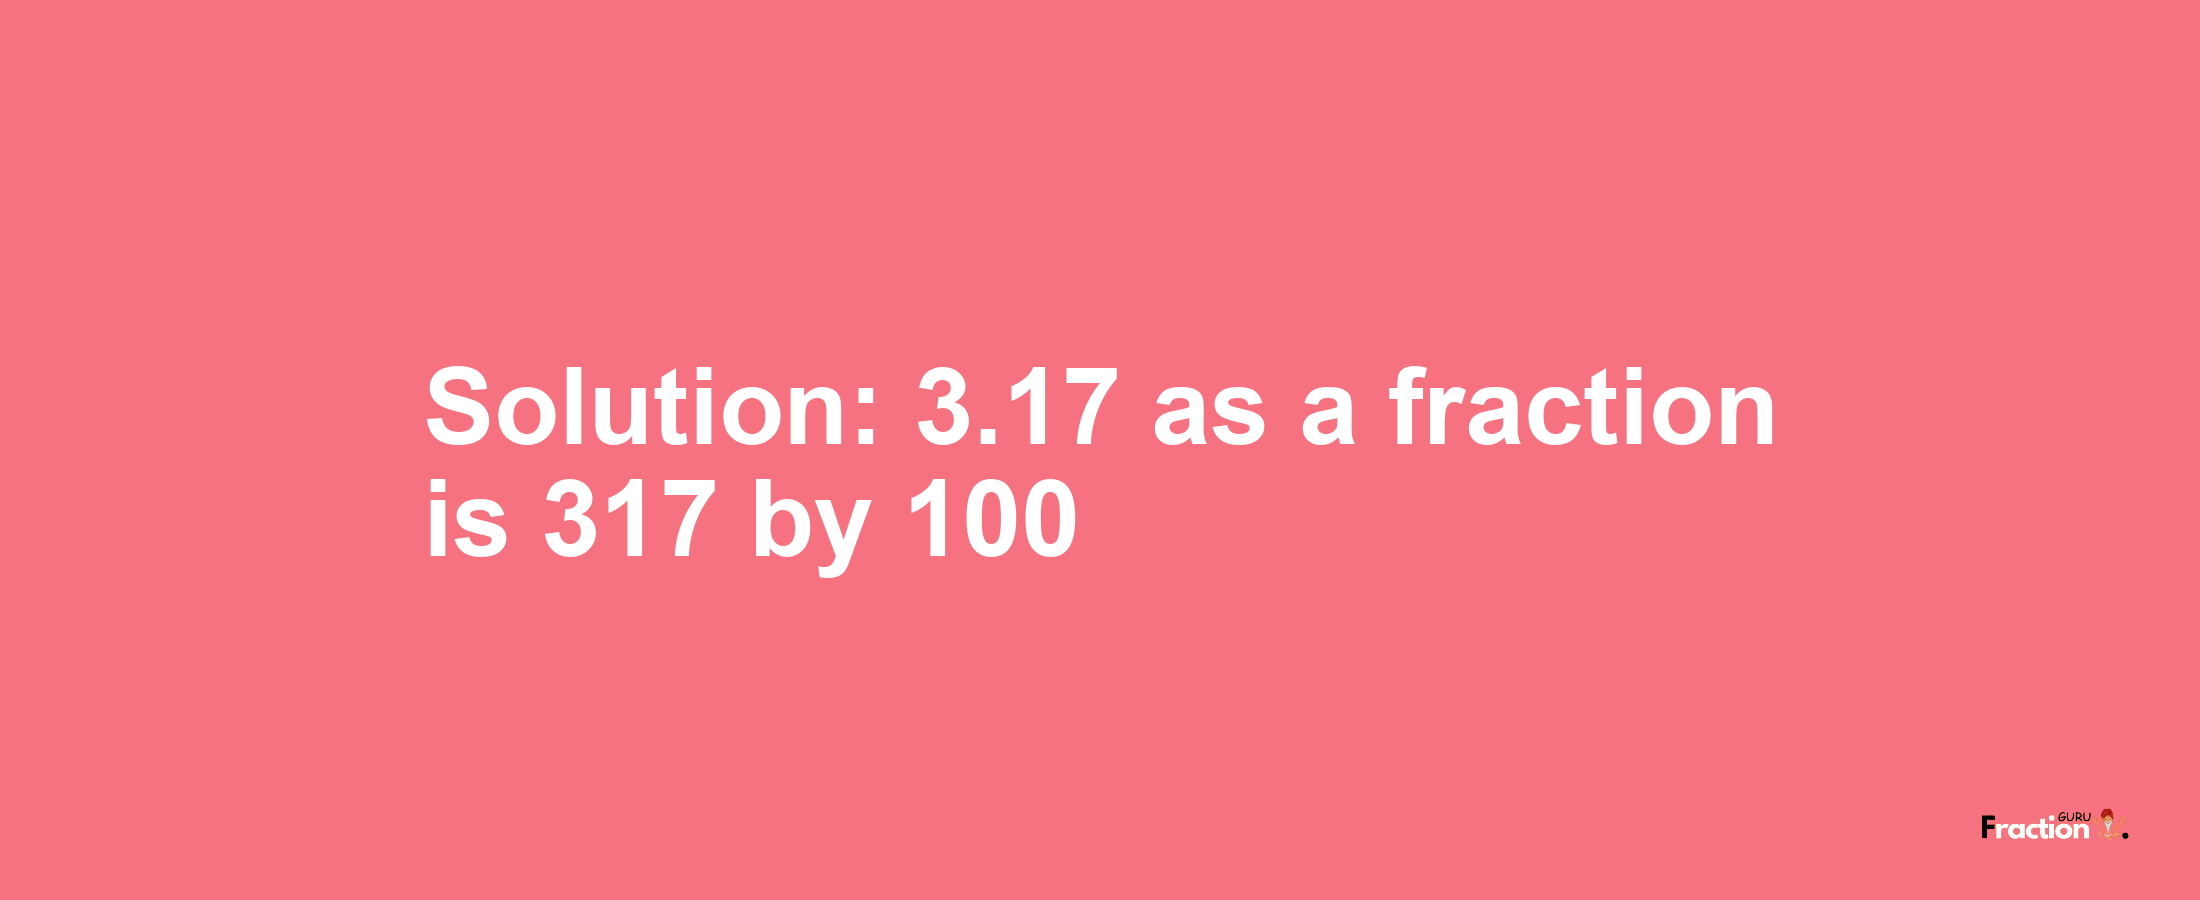 Solution:3.17 as a fraction is 317/100